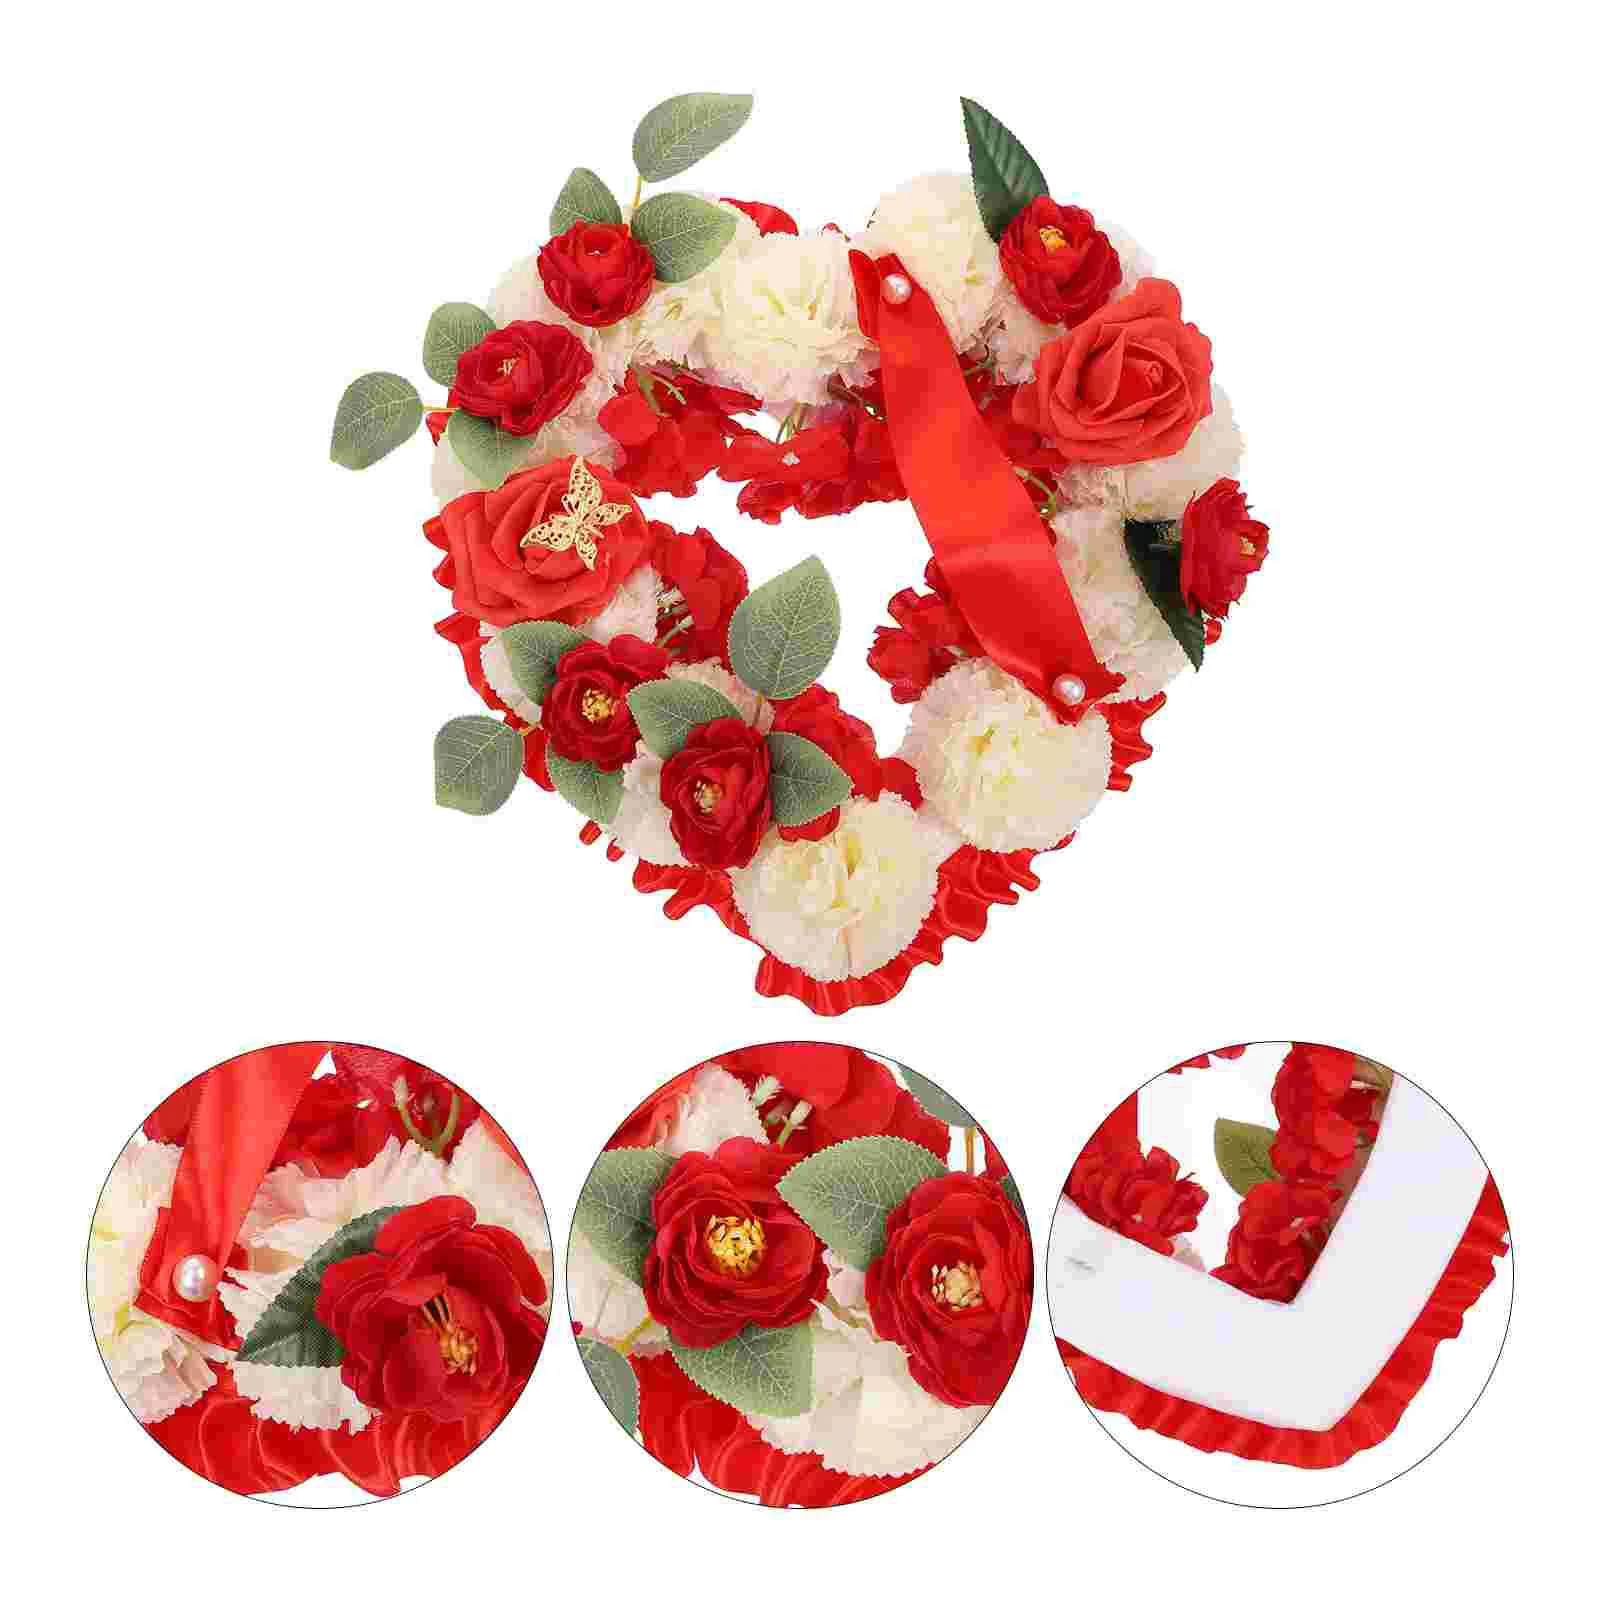 

Heart Memorial Wreath Floral Funeral Flower The Flowers Mourning Garland Foam Graveyard Fake Commemoration